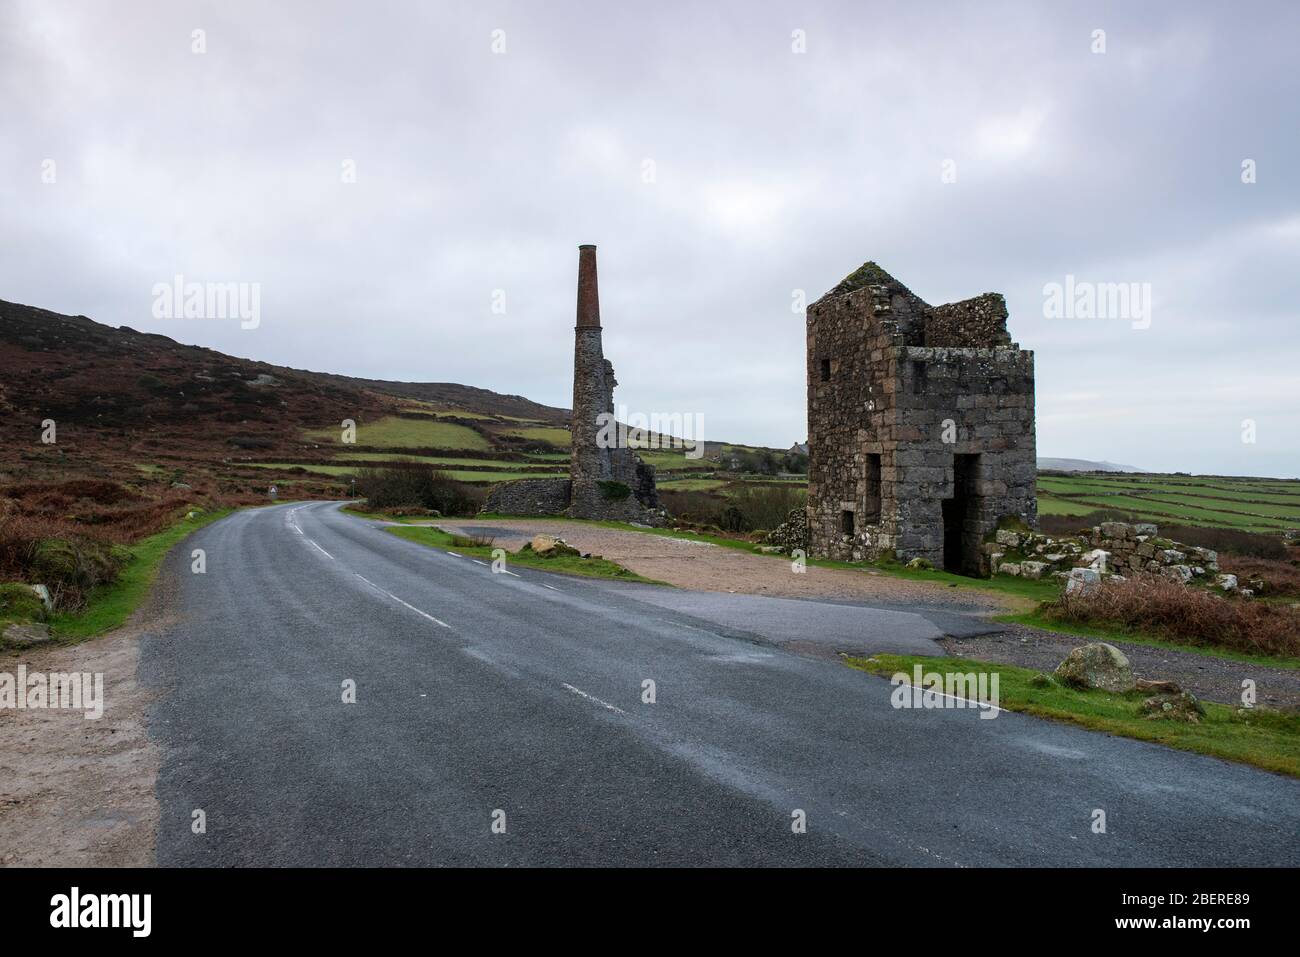 Botallack Mine and Count House Car Park, Cornwall England UK Stock Photo